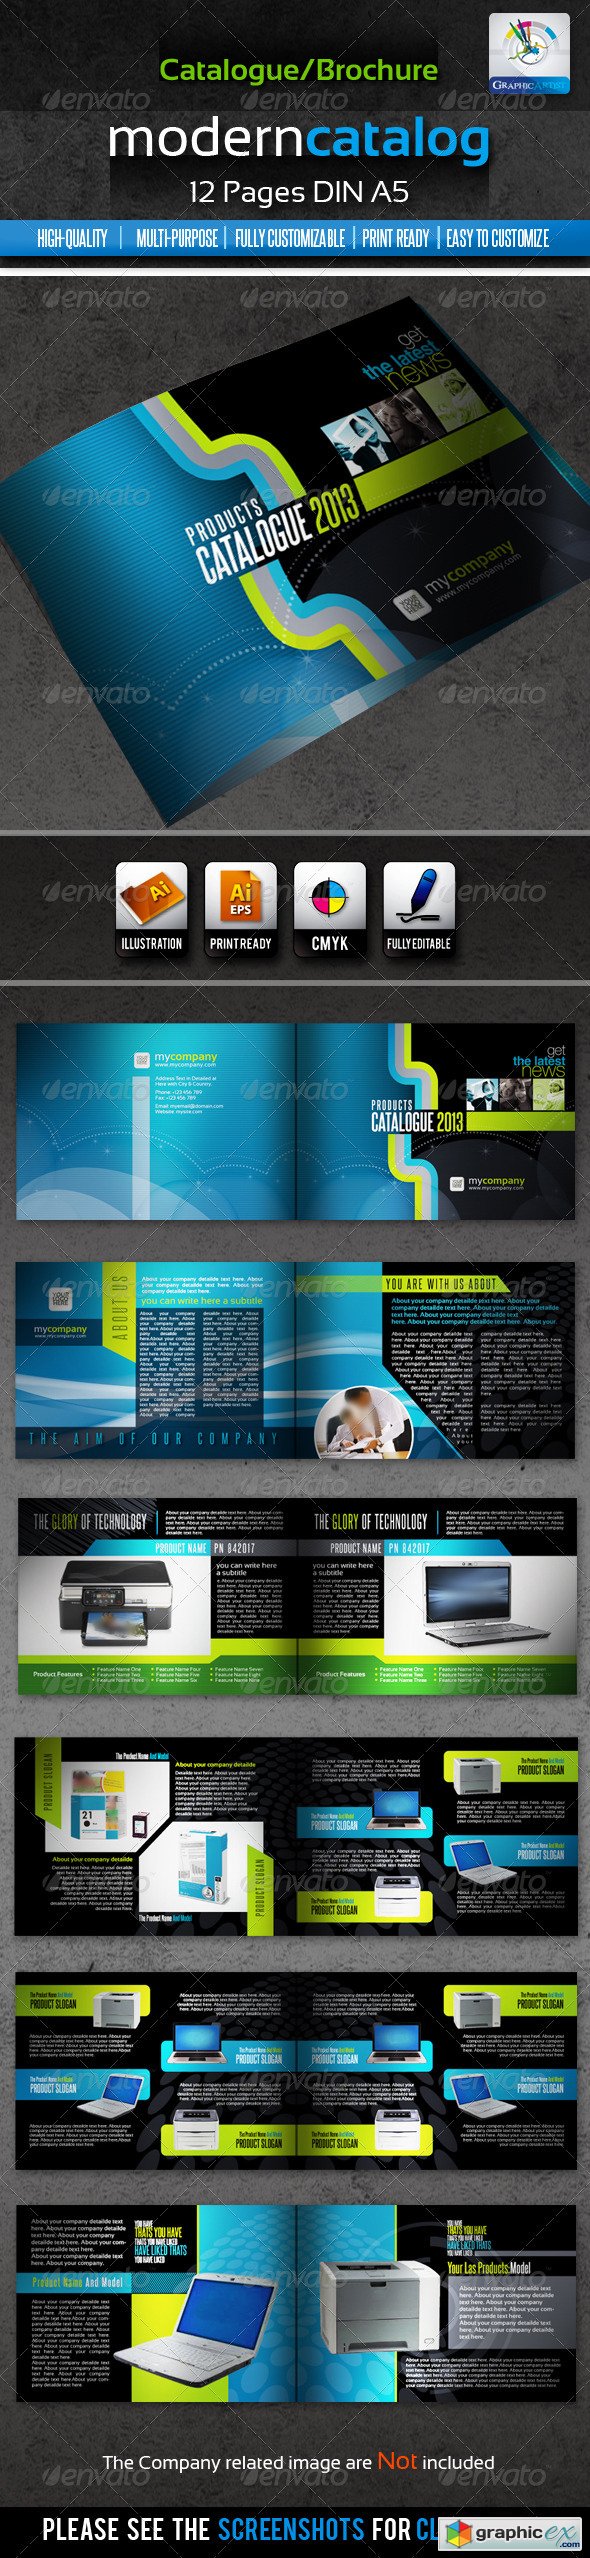 Corporate Modern Product Catalogue/Brochure 12page